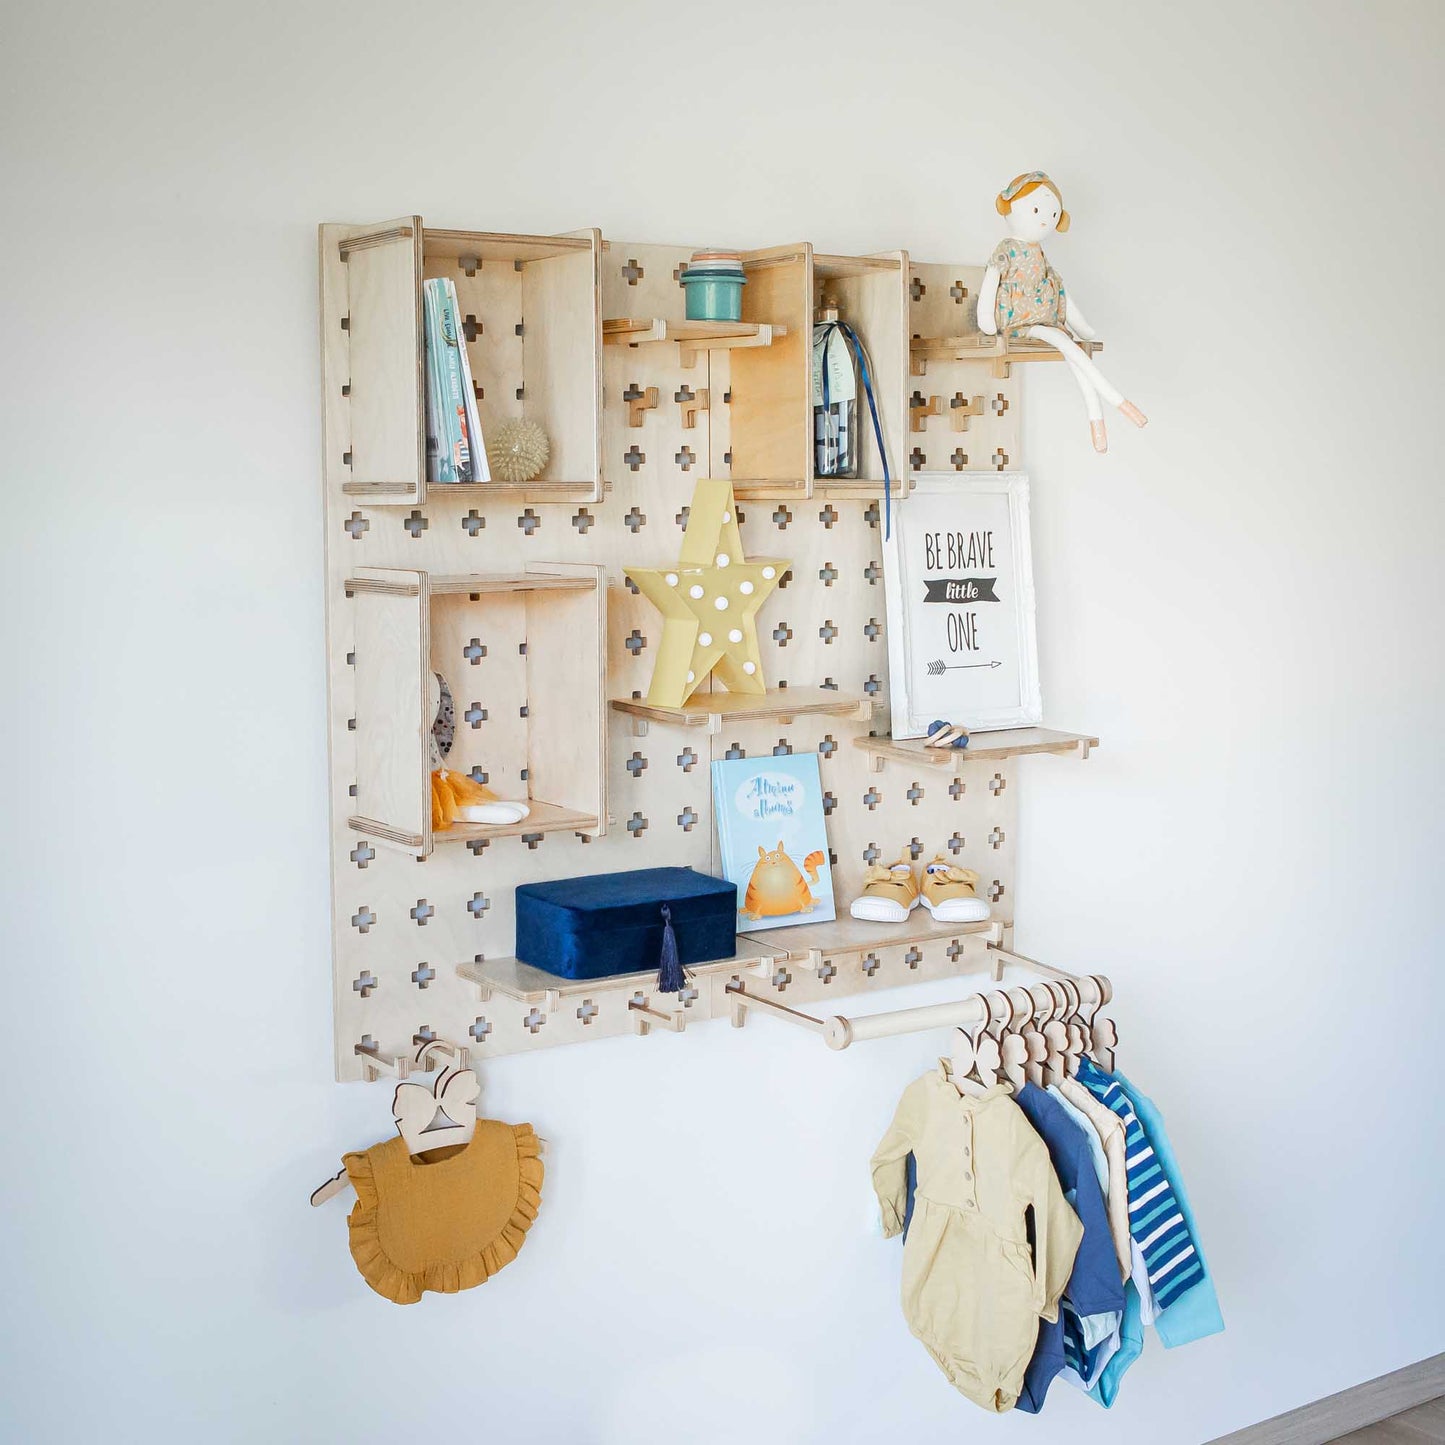 A Sweet HOME from wood Large Pegboard Shelf with Clothes Hanger wall mounted in a child's room for open storage shelves.